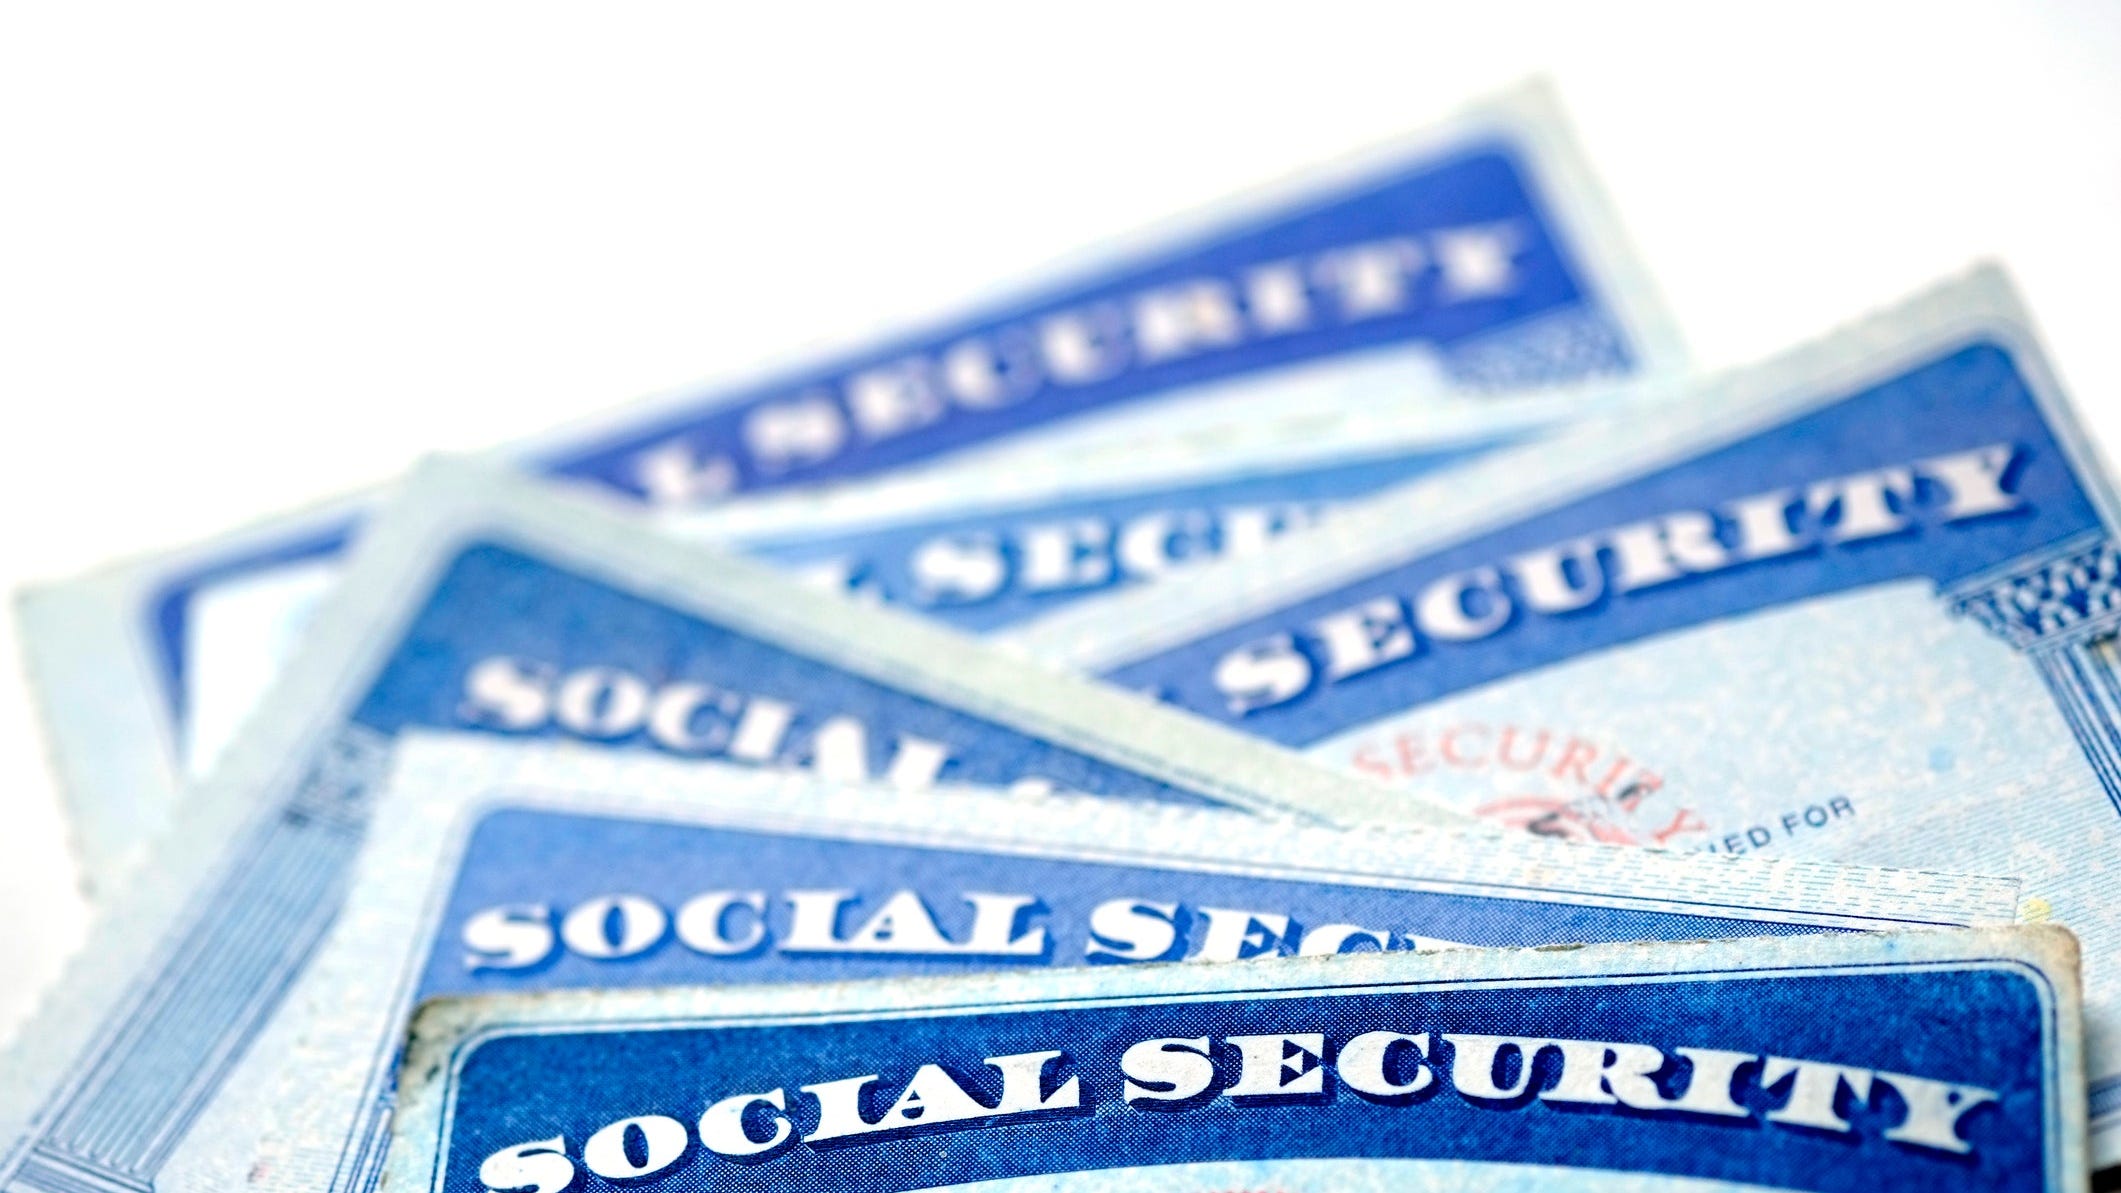 Reaching Social Security Administration during the pandemic